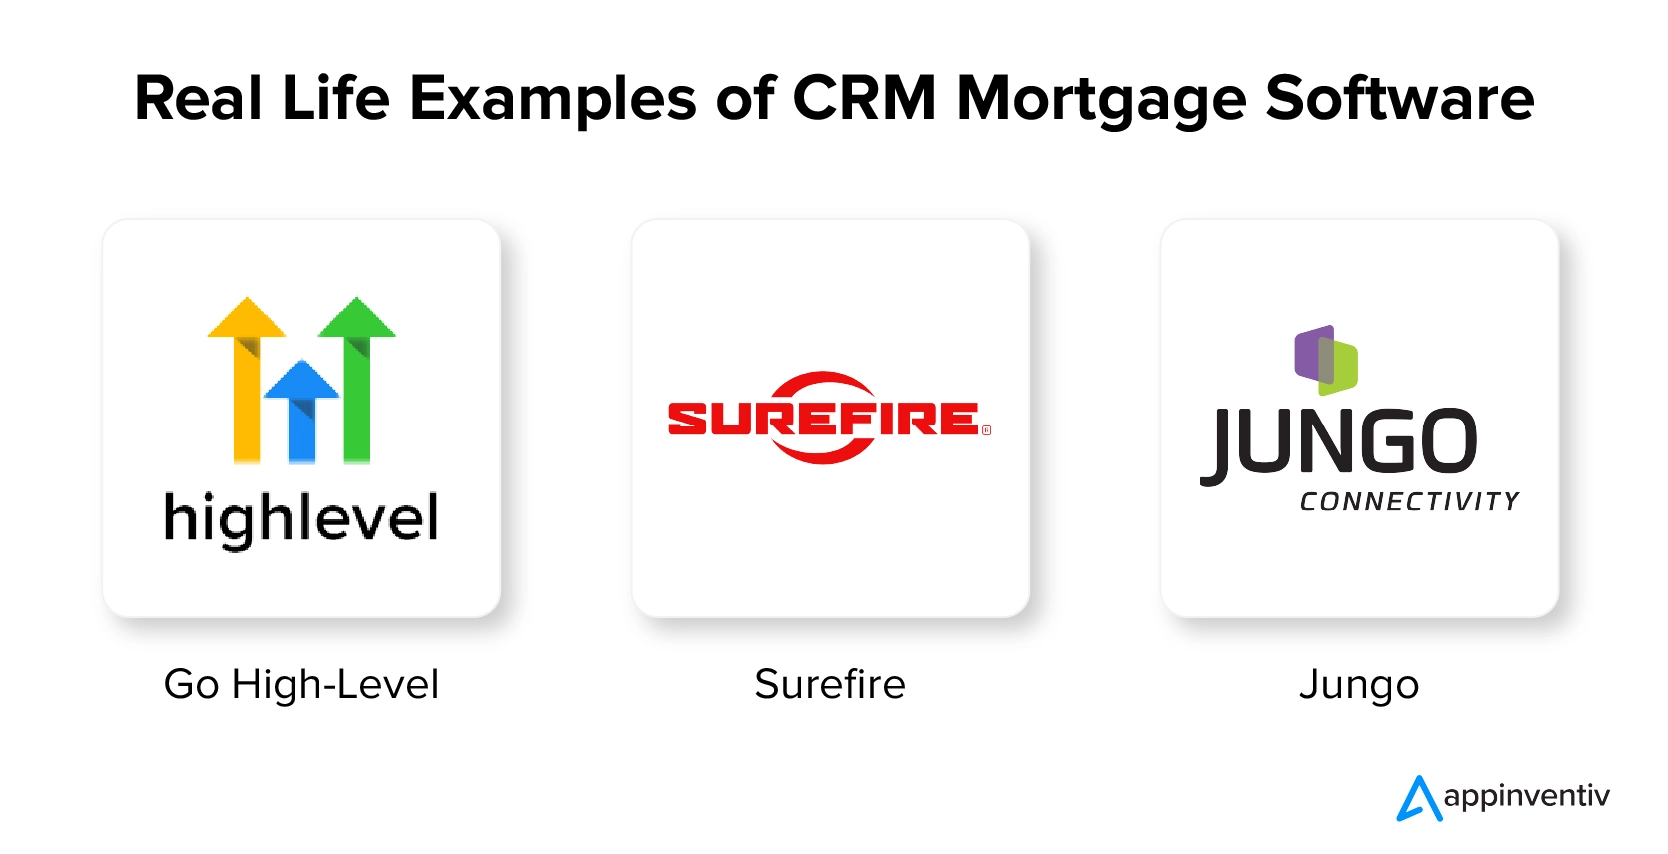 Real Life Examples of CRM Mortgage Software